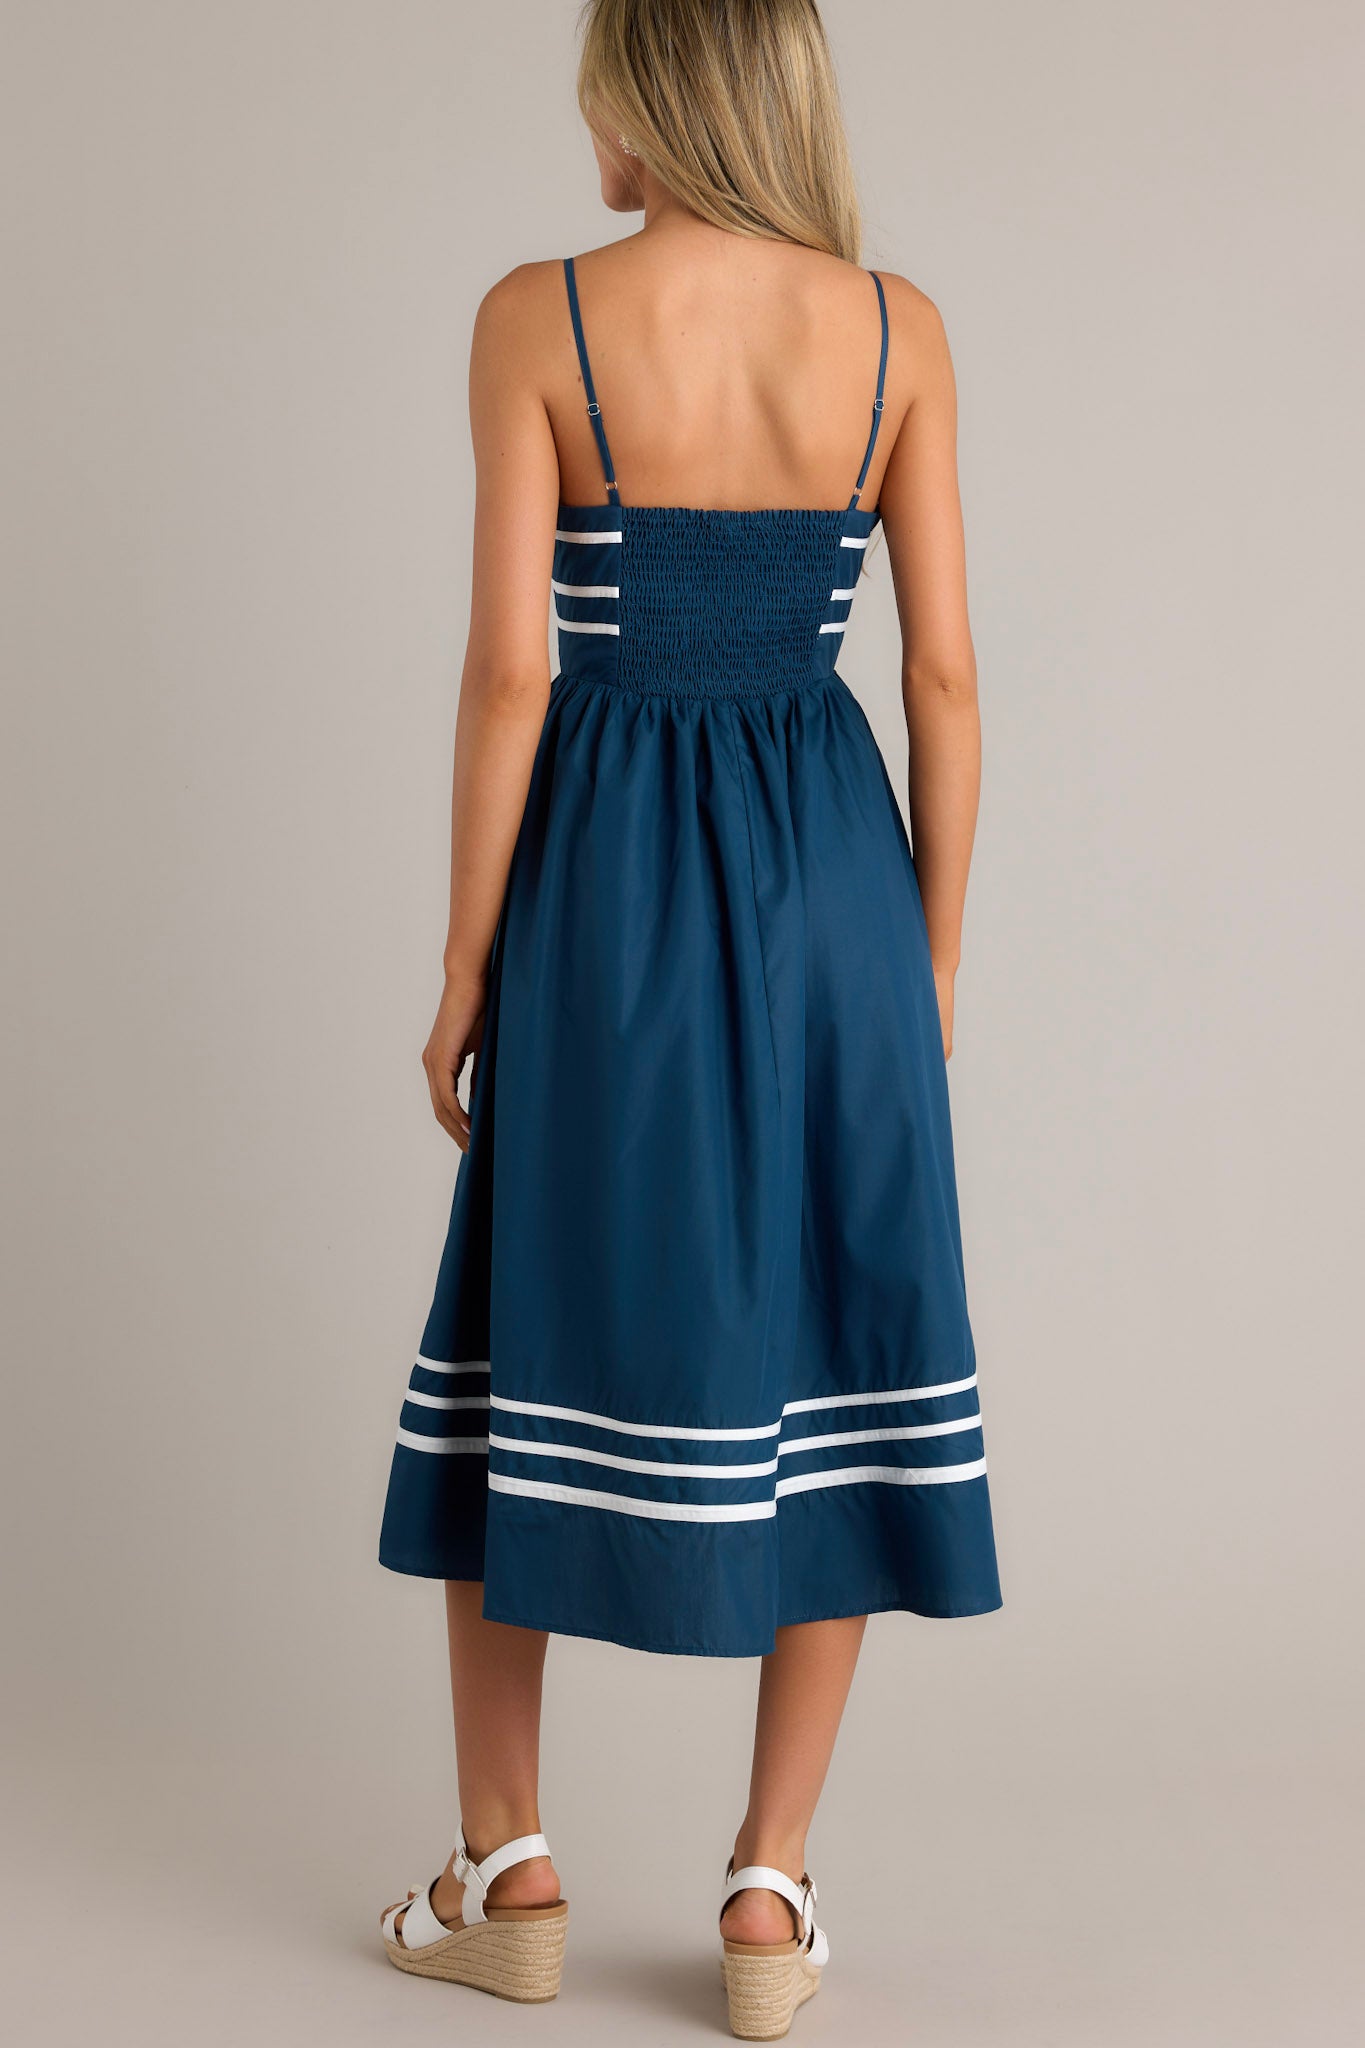 Back view of a navy midi dress highlighting the smocked back insert, thin adjustable straps, and an ivory striped hemline.